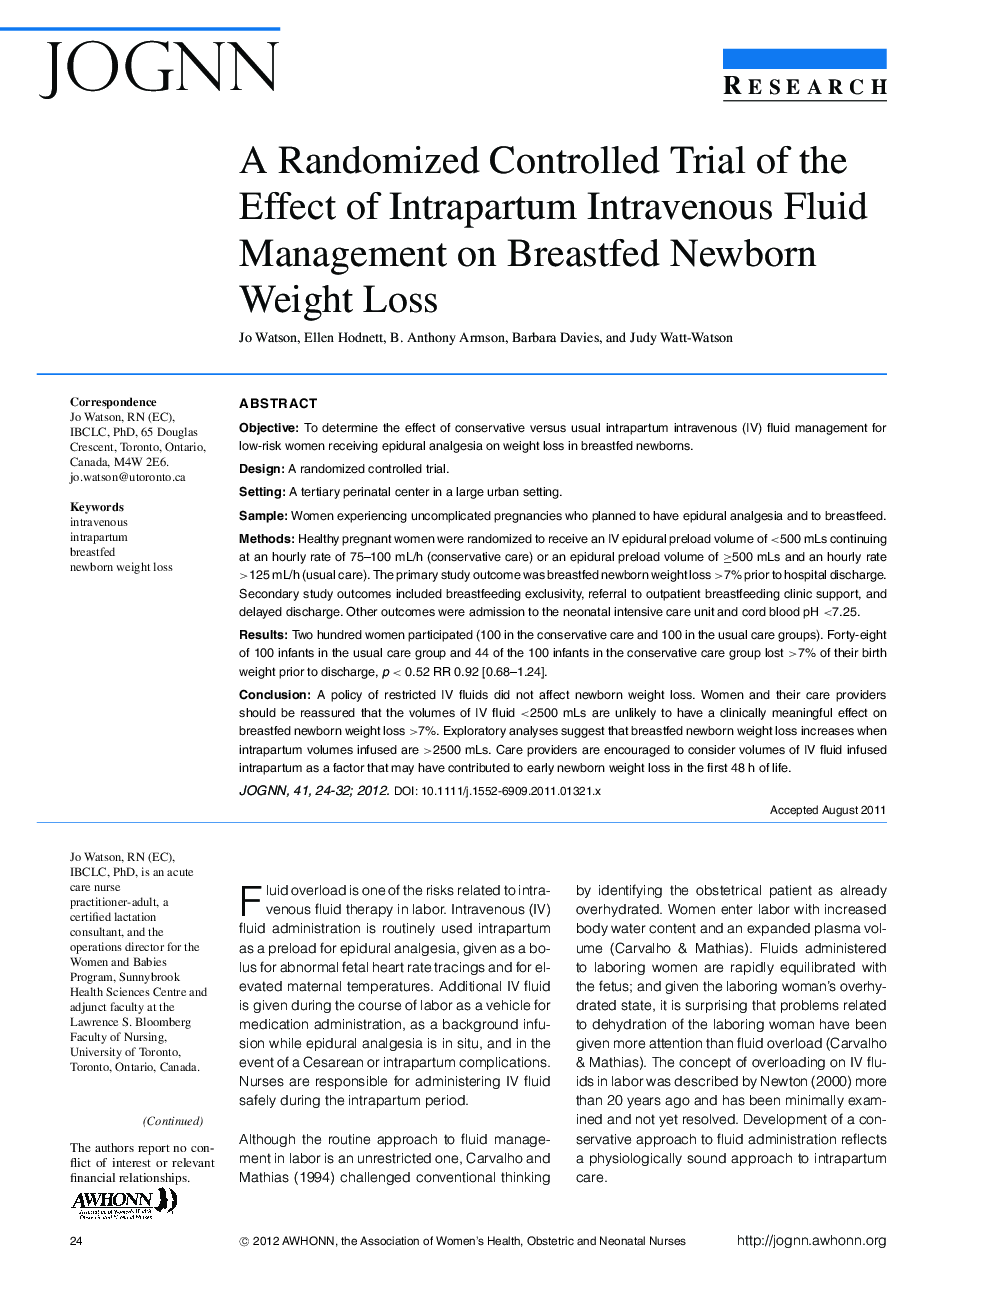 A Randomized Controlled Trial of the Effect of Intrapartum Intravenous Fluid Management on Breastfed Newborn Weight Loss